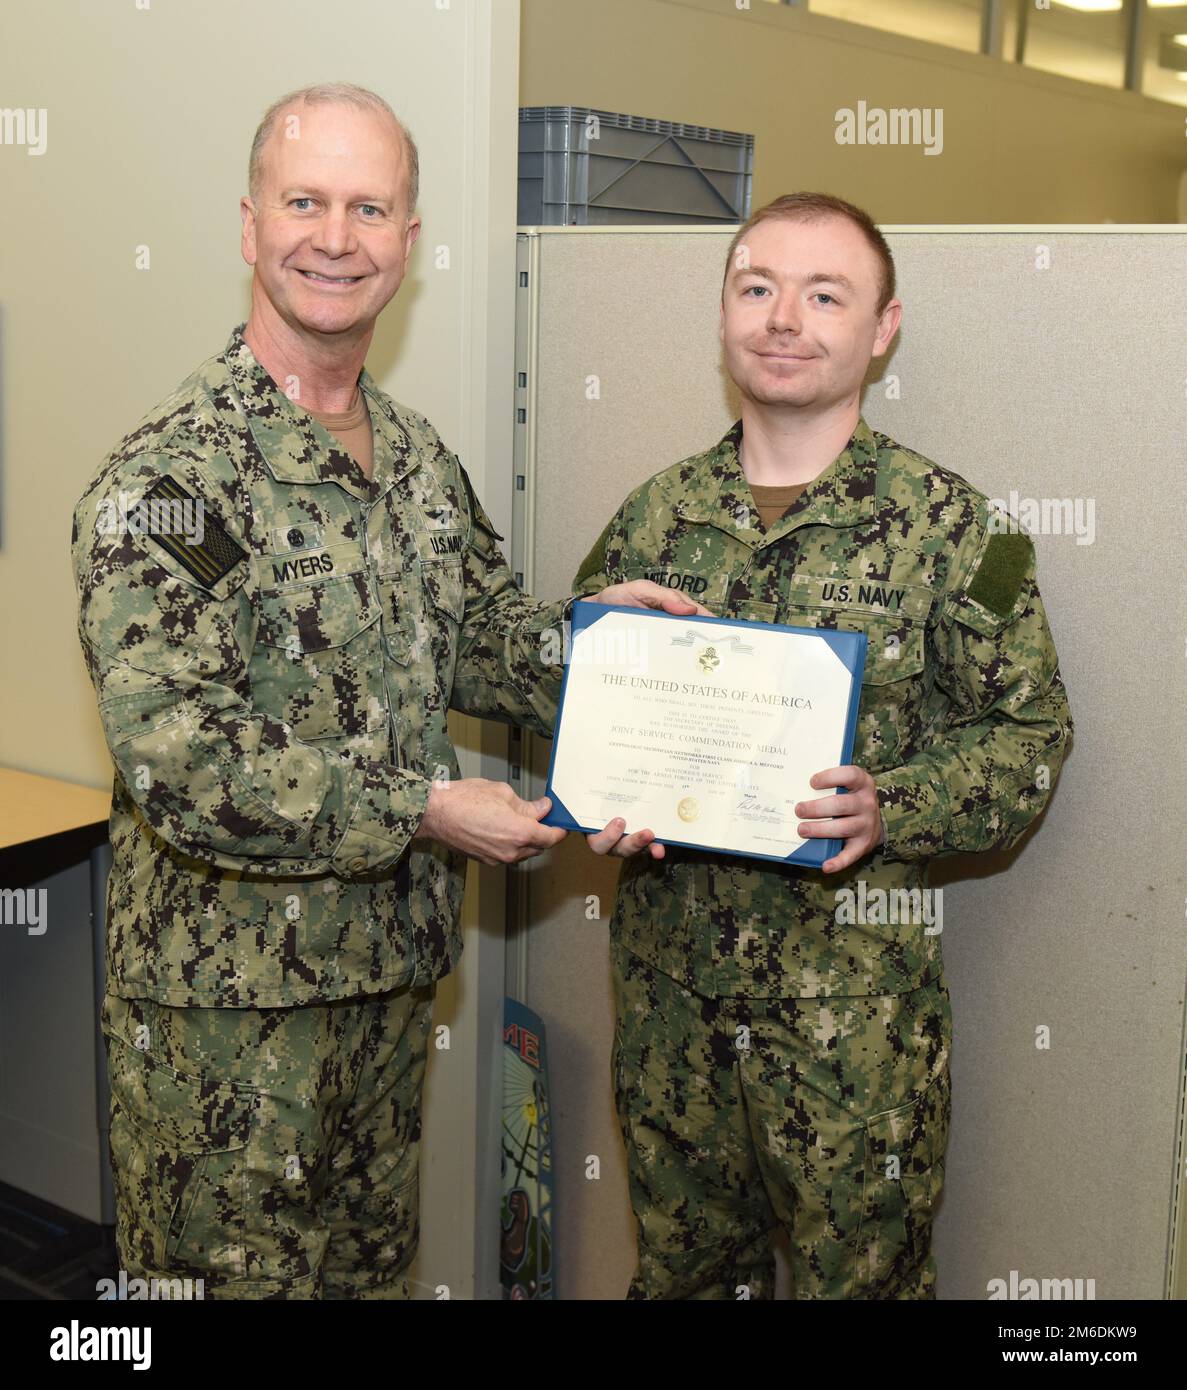 FORT GEORGE G. MEADE, Md.---Petty Officer 1st Class Joshua Mefford received a Joint Service Commendation Medal on Apr. 25, 2022 for work that directly impacted national security on dozens of occasions, producing results that were included in several Presidential Briefs.  Vice Adm. Ross Myers, commander, U.S. Fleet Cyber Command/U.S. 10th Fleet, presented the award to Mefford at Computer Network Operations. Stock Photo